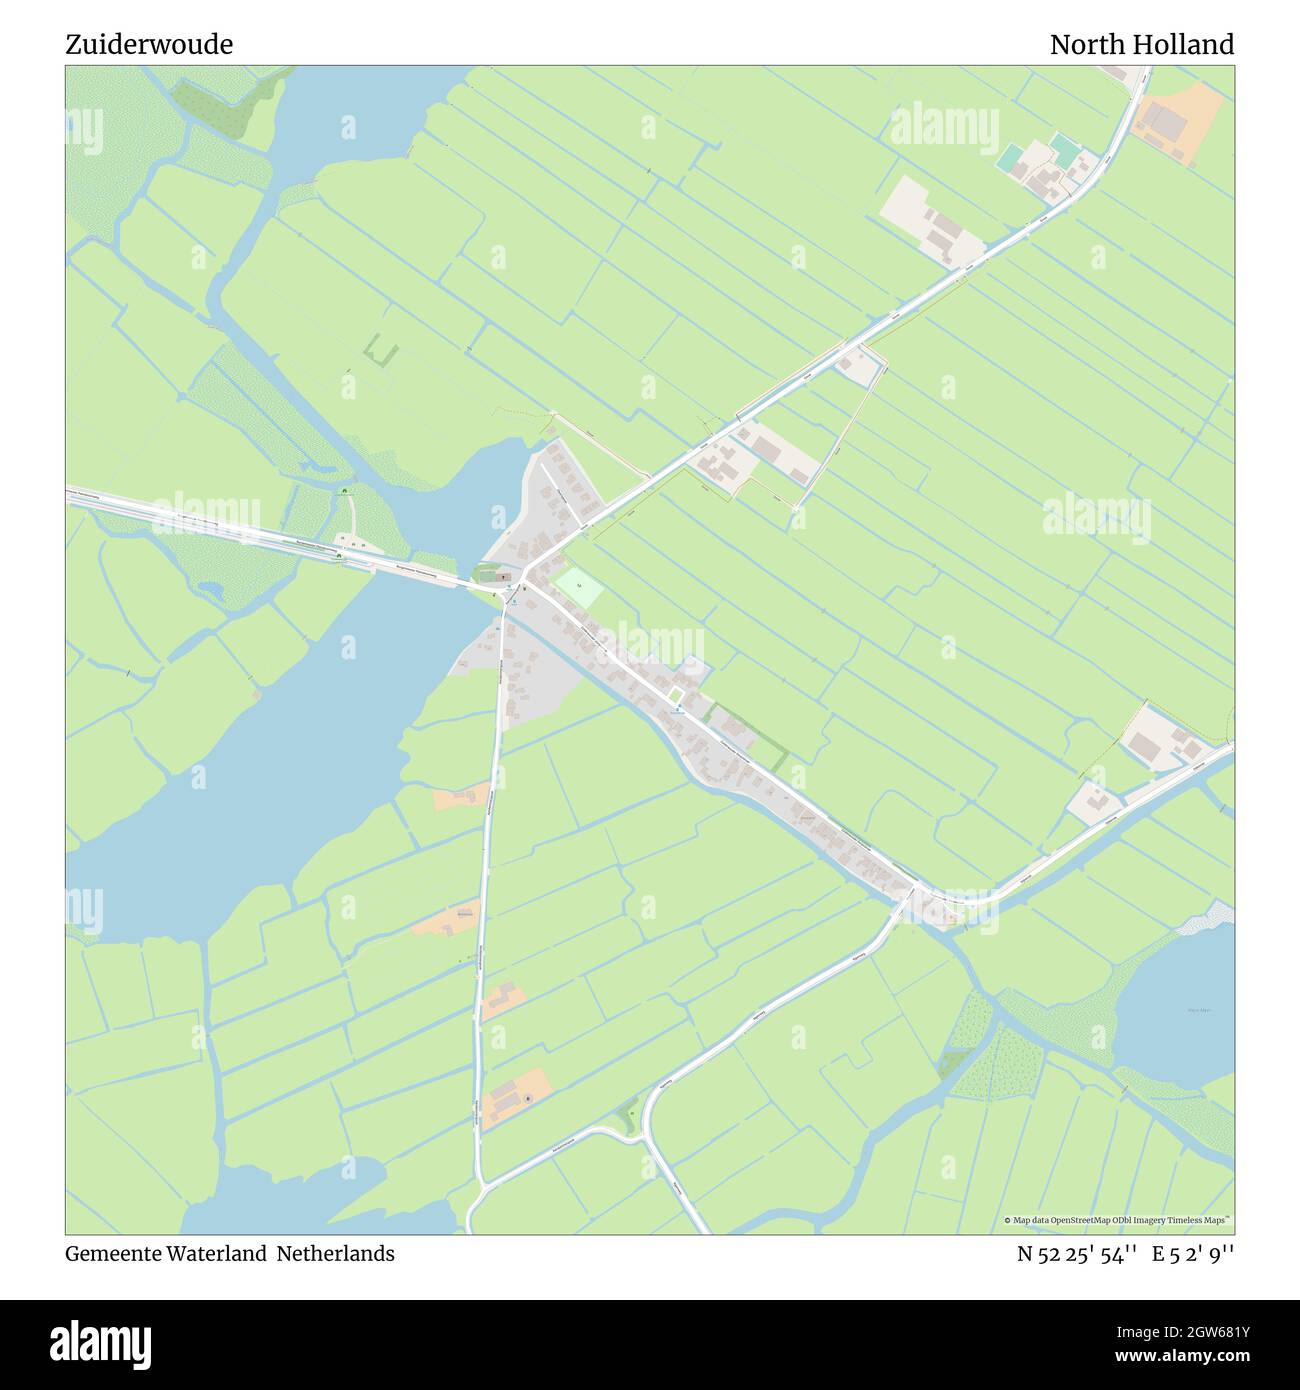 Zuiderwoude, Gemeente Waterland, Netherlands, North Holland, N 52 25' 54'', E 5 2' 9'', map, Timeless Map published in 2021. Travelers, explorers and adventurers like Florence Nightingale, David Livingstone, Ernest Shackleton, Lewis and Clark and Sherlock Holmes relied on maps to plan travels to the world's most remote corners, Timeless Maps is mapping most locations on the globe, showing the achievement of great dreams Stock Photo